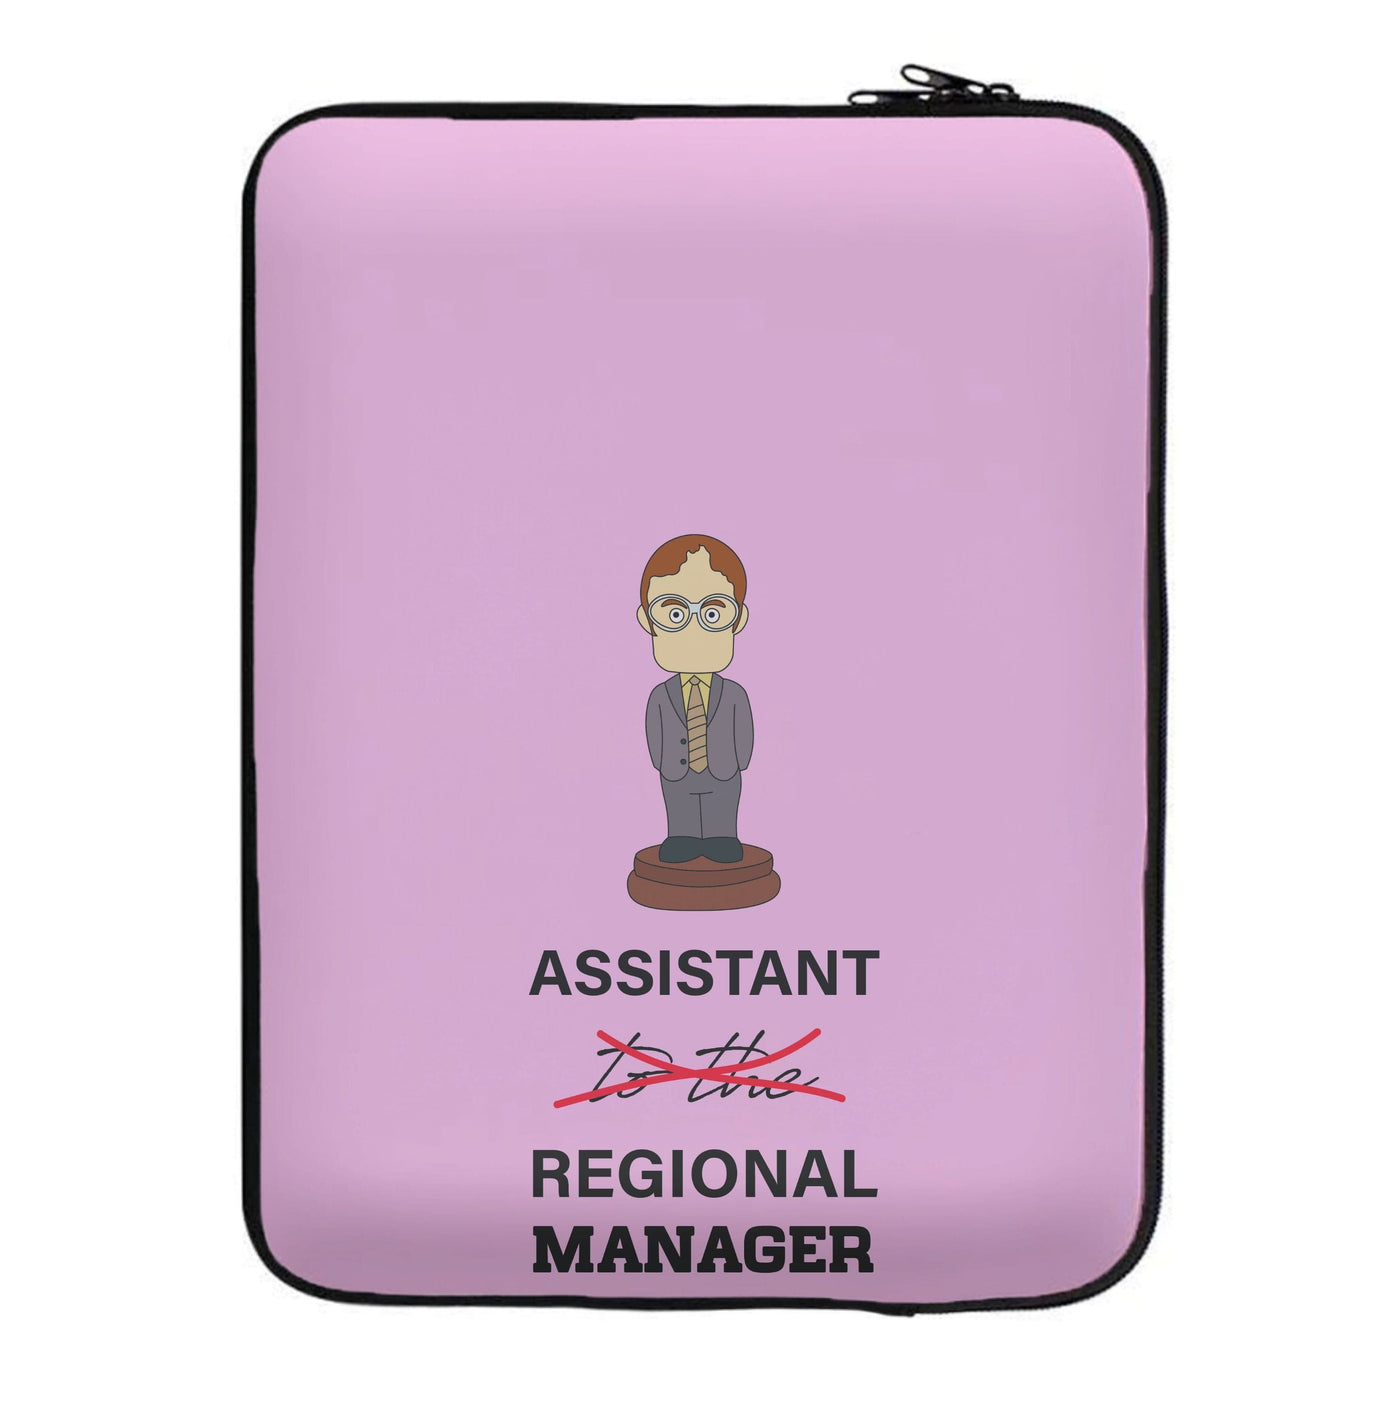 Assistant Regional Manager - The Office Laptop Sleeve